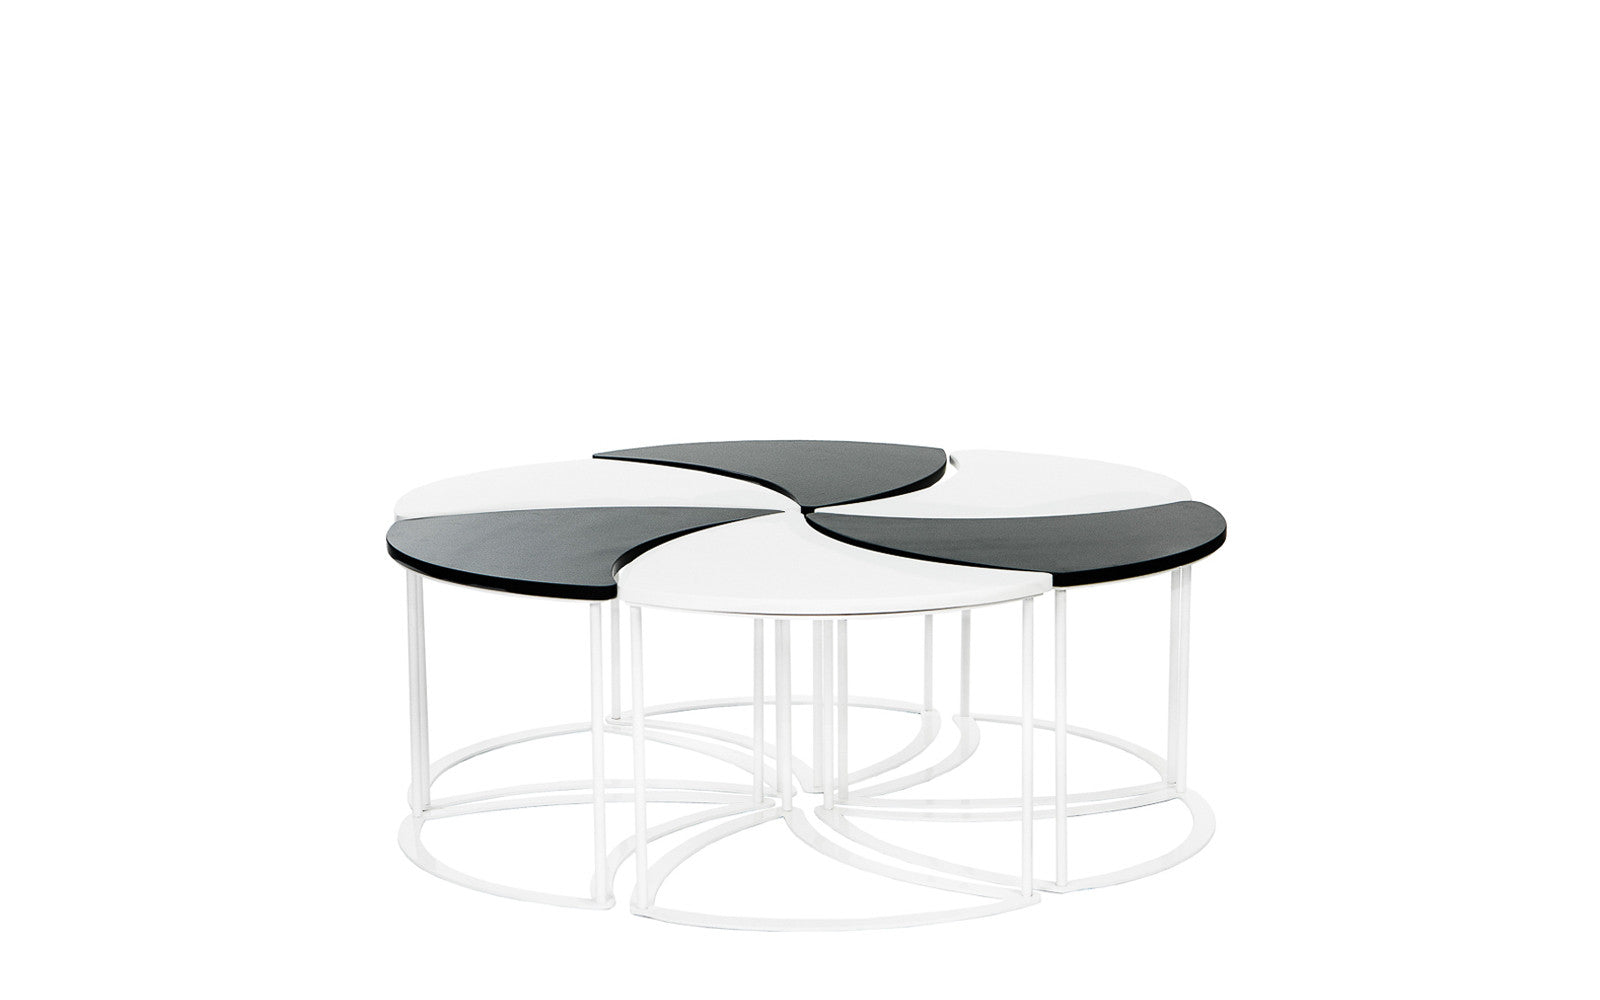 Spiral Contemporary 70s Inspired Two Tone Modular Outdoor Coffee Table